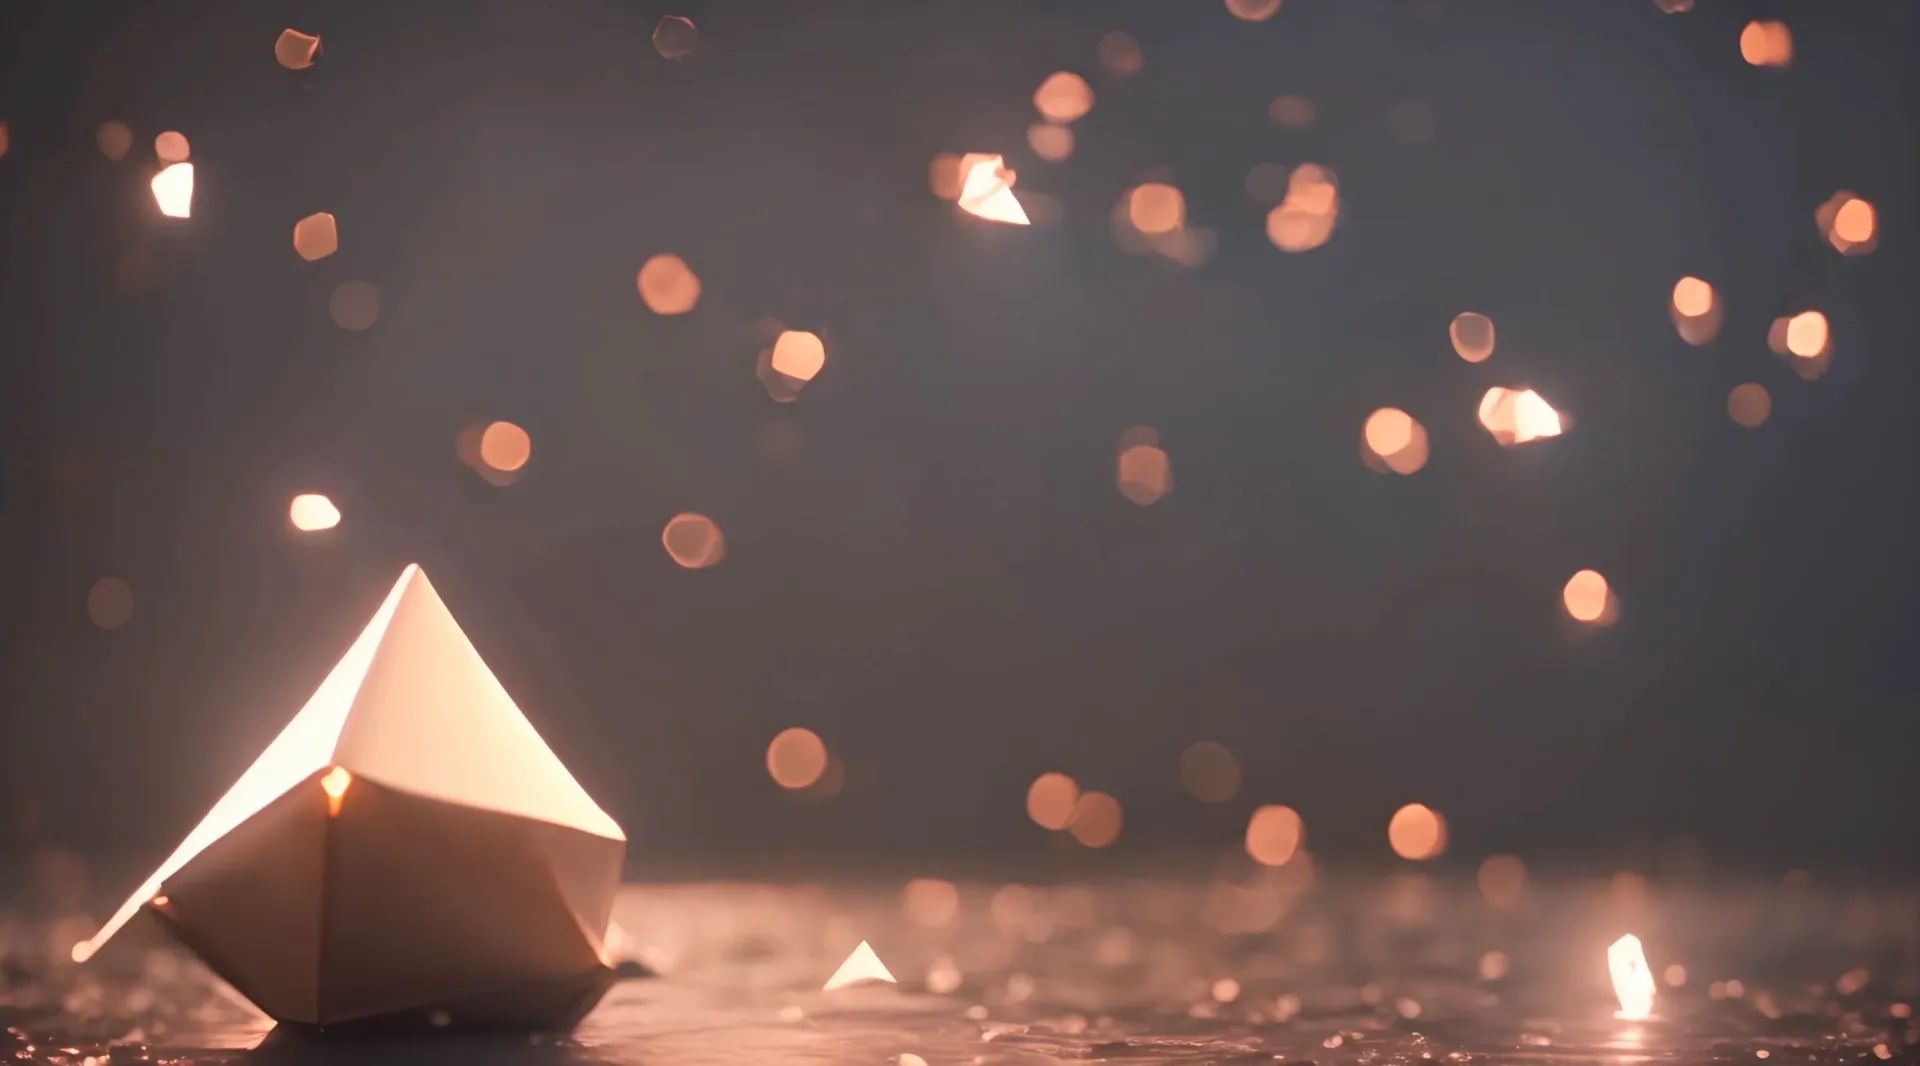 Ethereal Geometric Shape with Warm Glowing Particles Backdrop